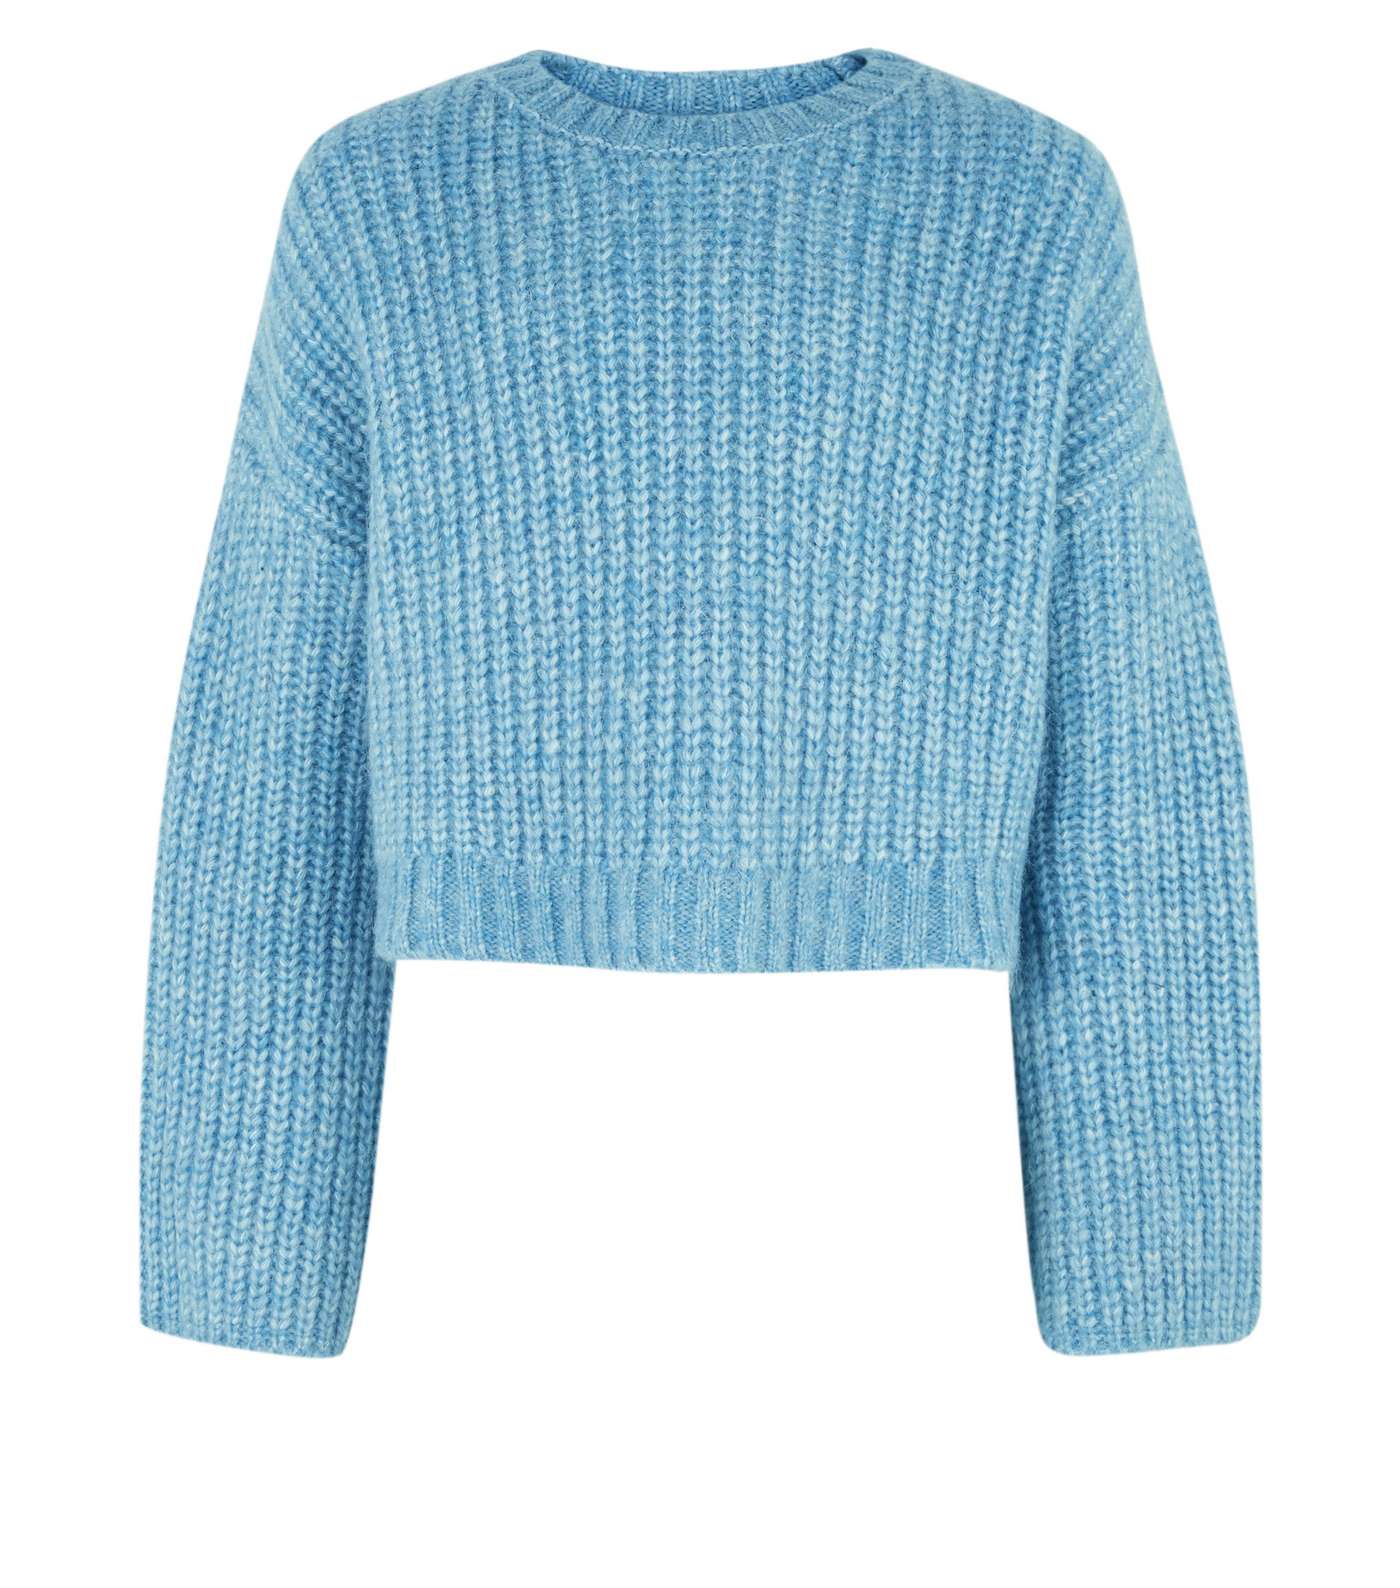 Girls Pale Blue Wide Sleeve Knitted Jumper Image 4